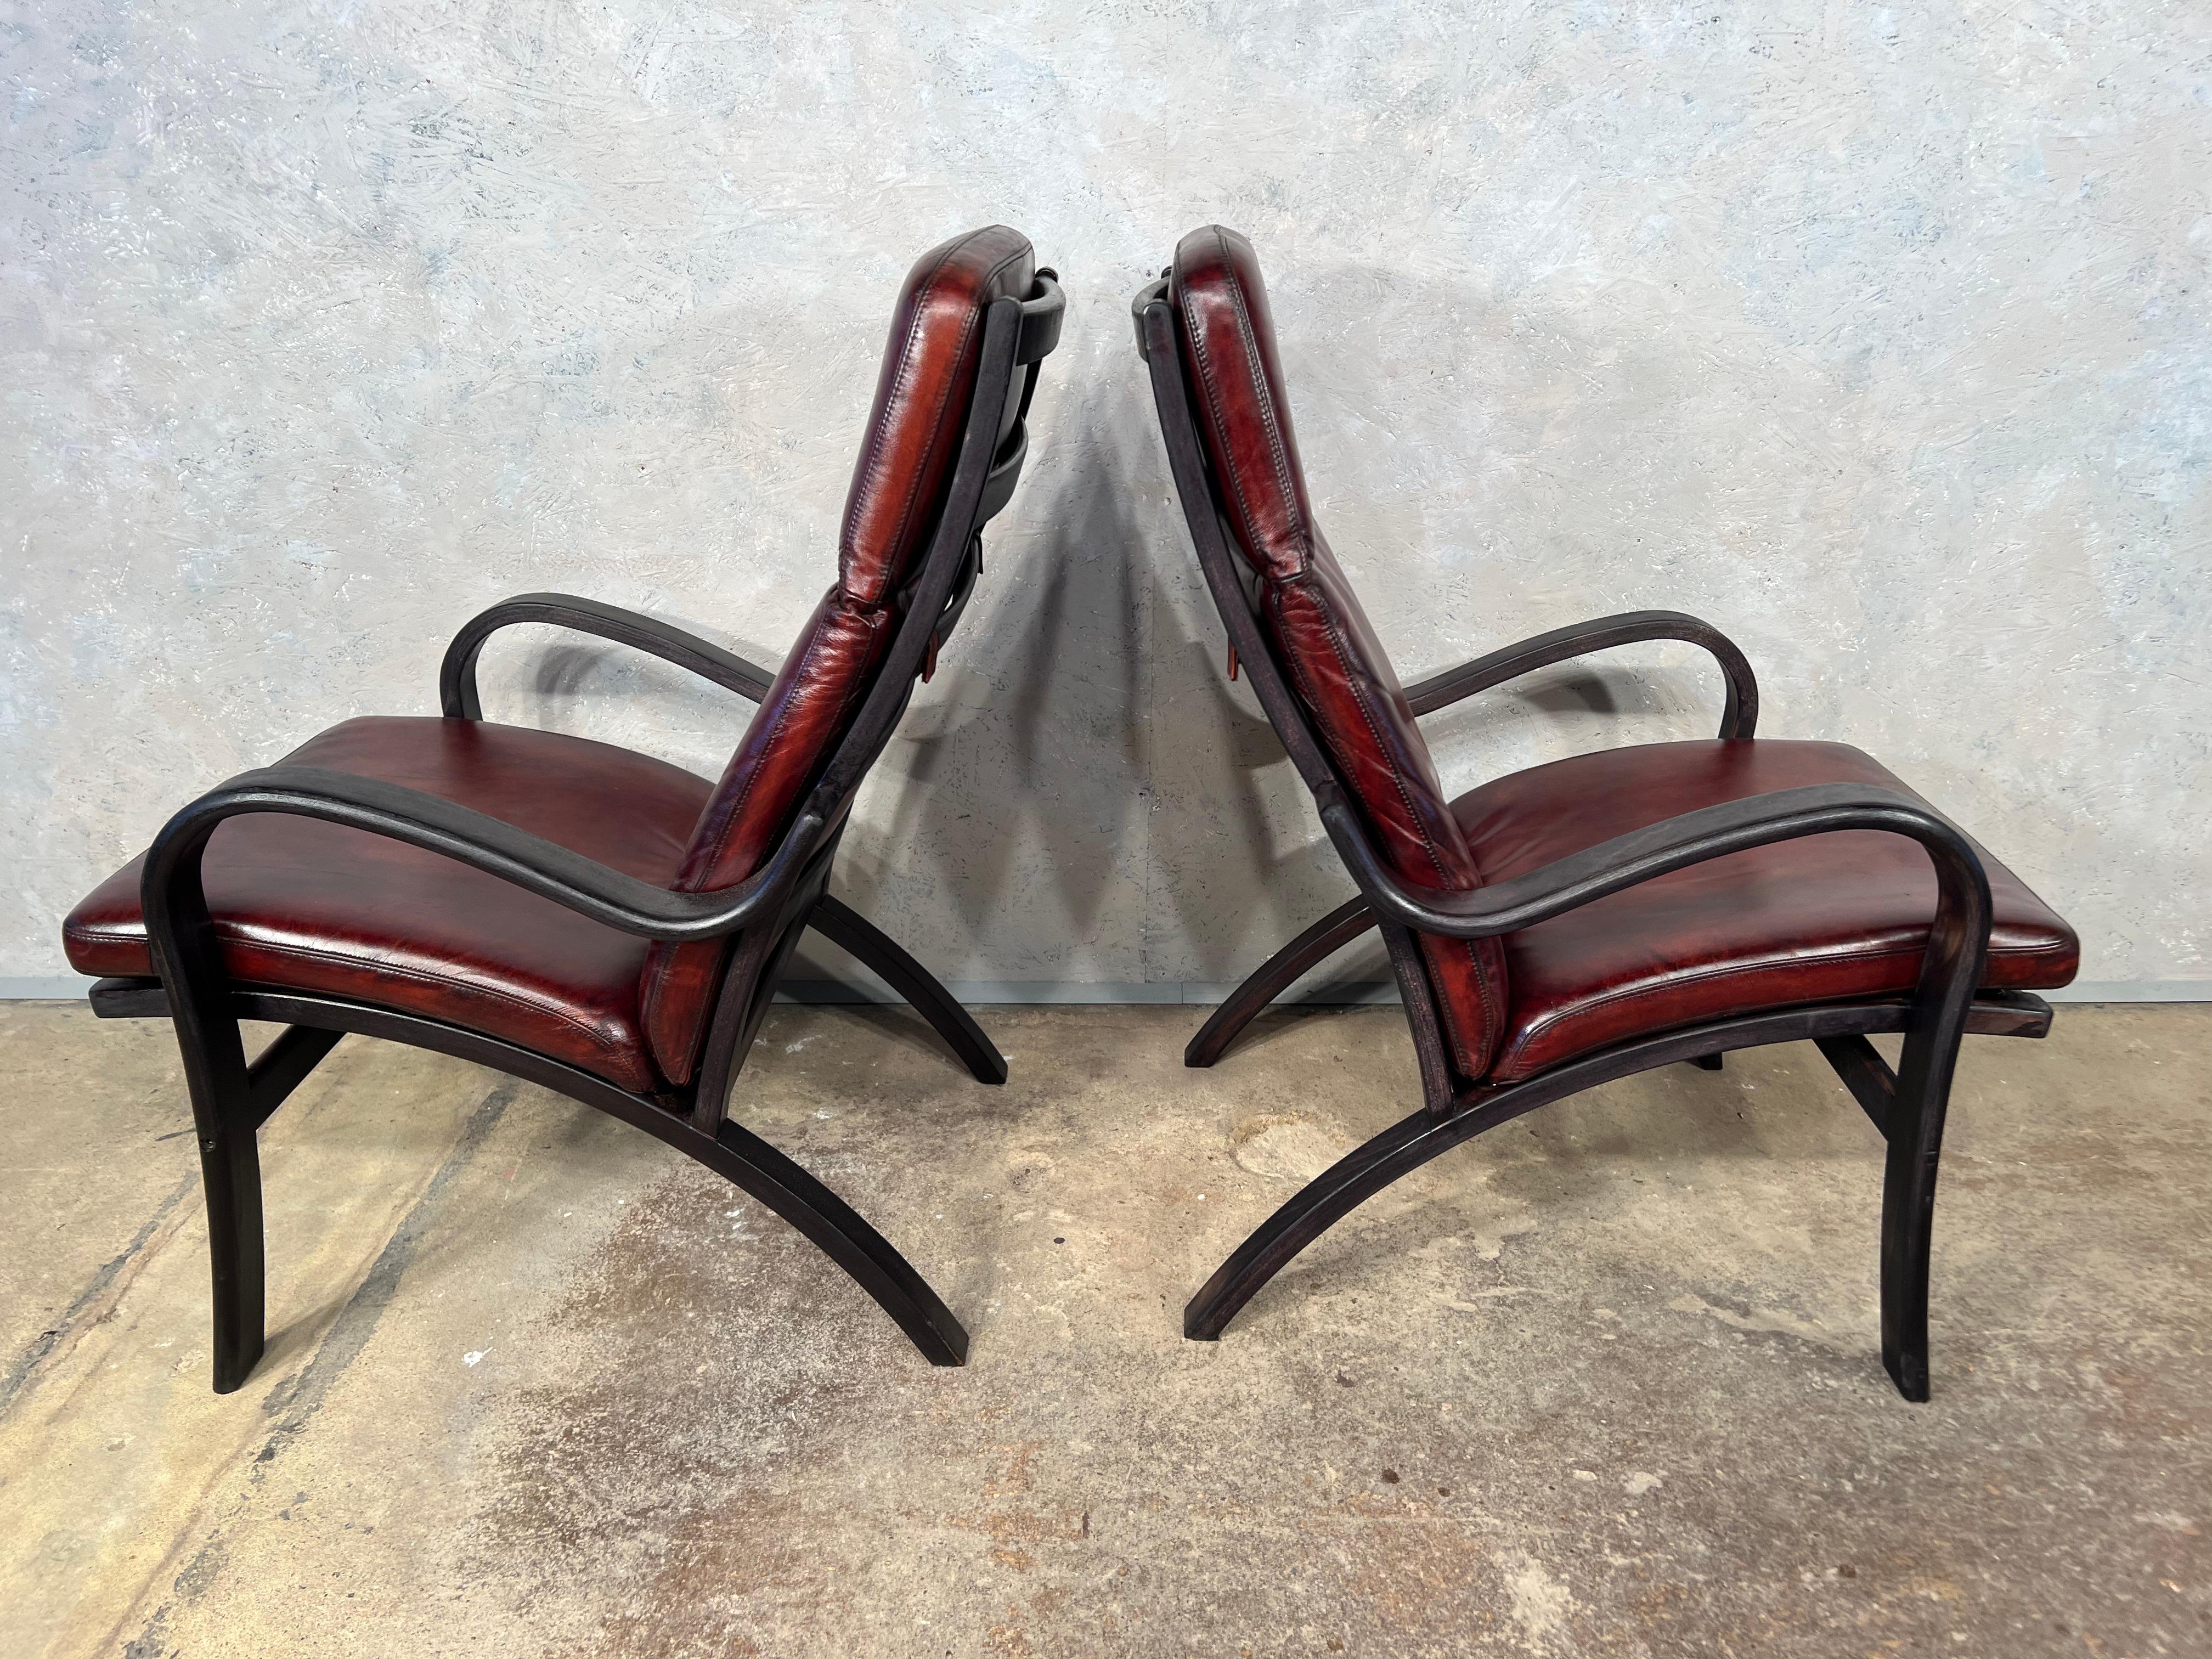 Stunning Pair of Vintage Danish Bentwood Leather Chairs 70s Retro #418 For Sale 3